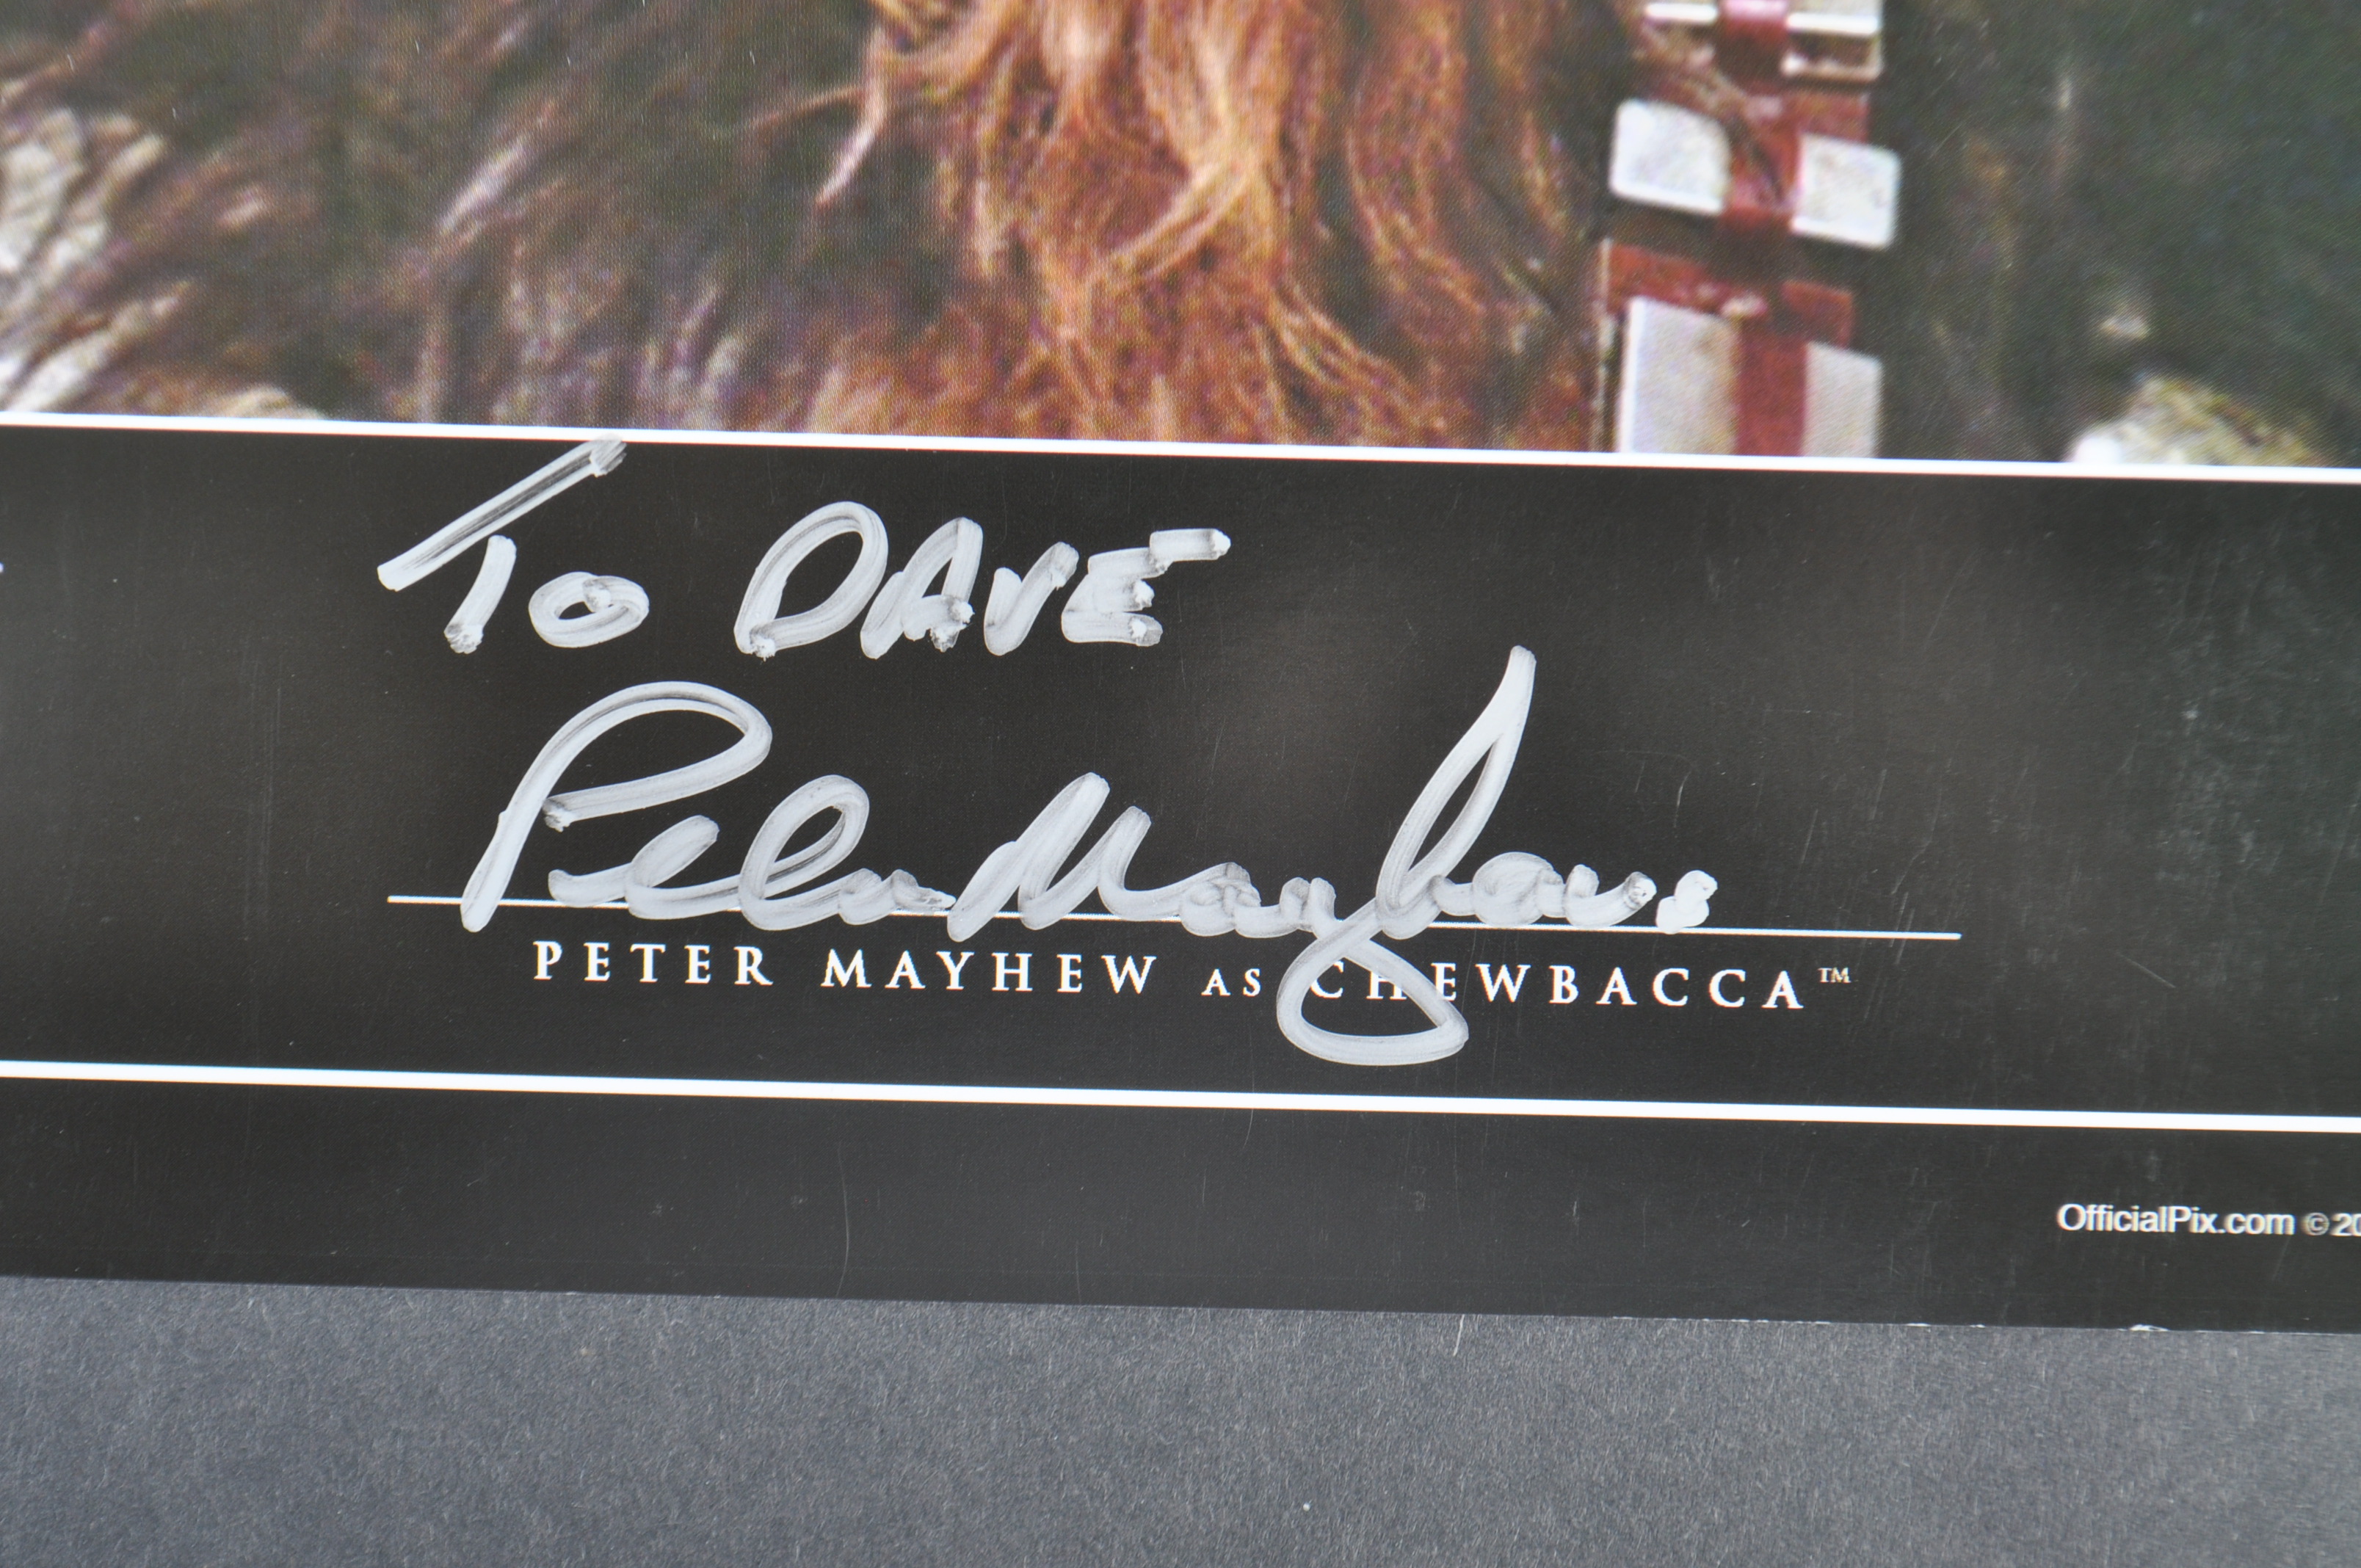 ESTATE OF DAVE PROWSE – STAR WARS - PETER MAYHEW SIGNED PHOTO - Image 2 of 2